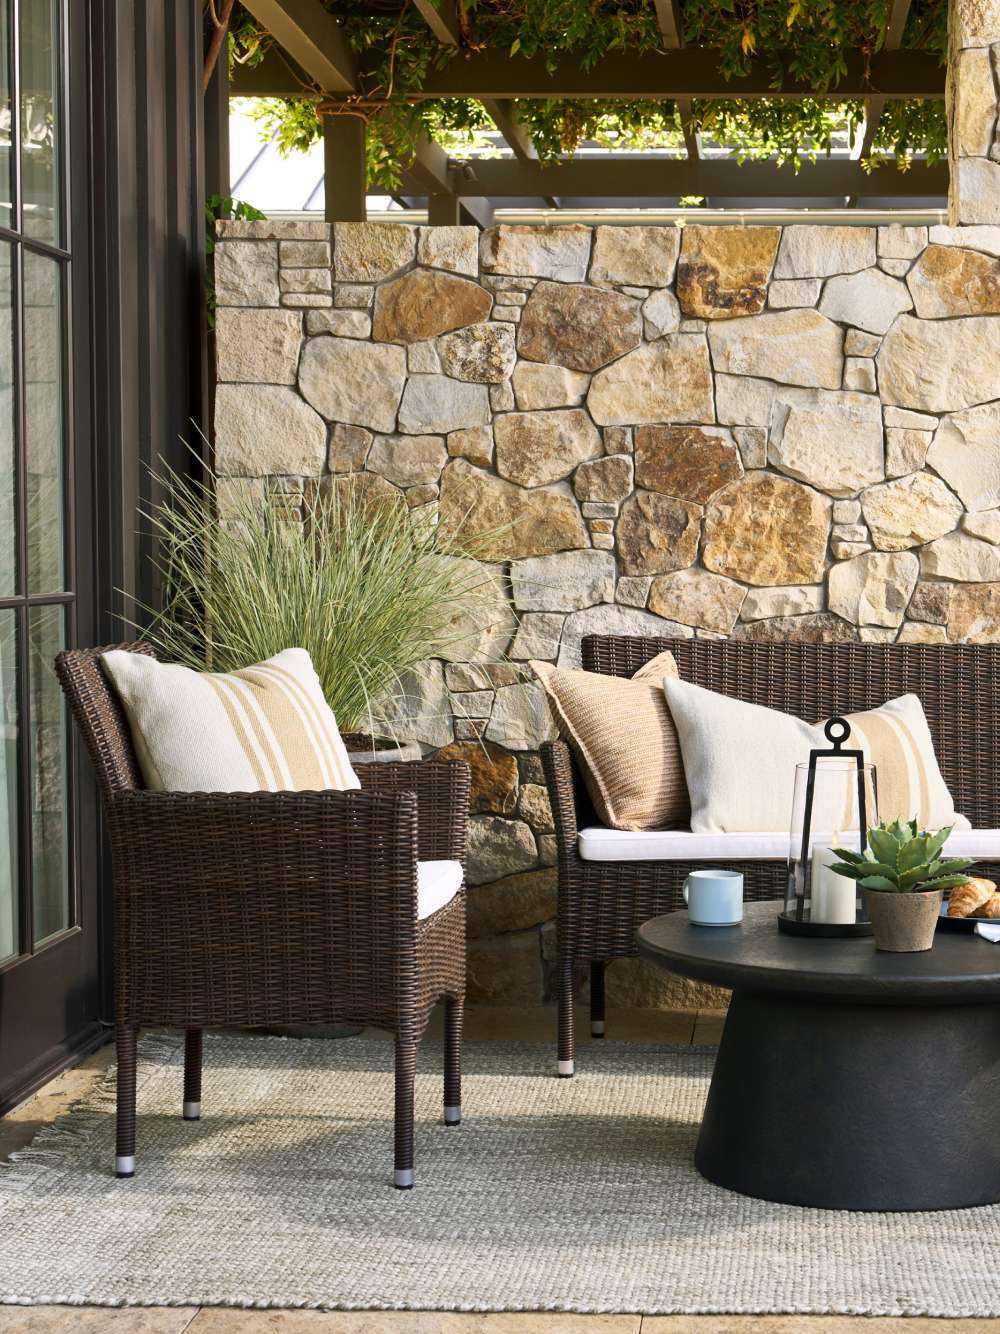 OUTDOOR FURNITURE SETS STARTING AT $449